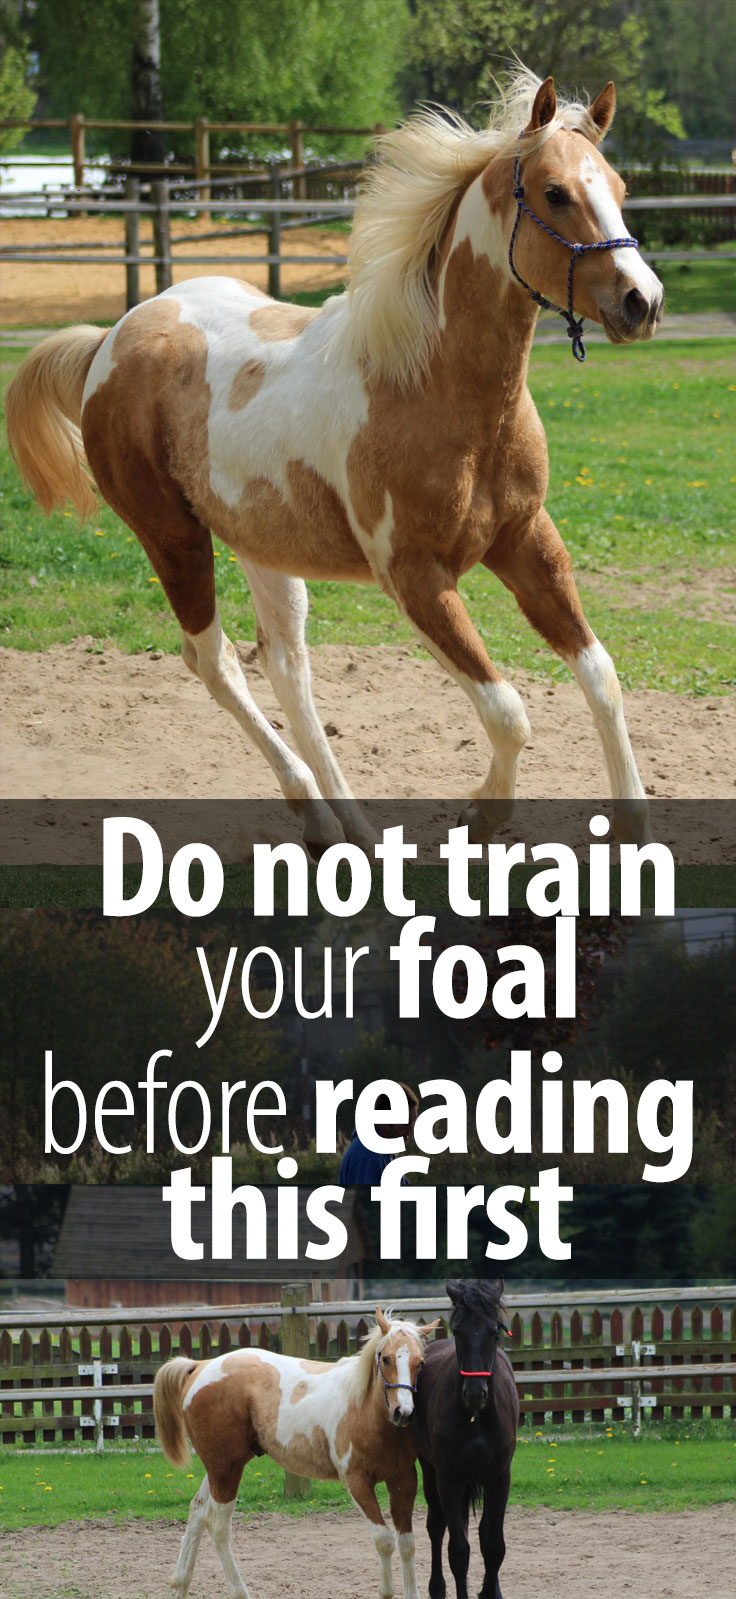 Remember the Horse that almost killed the Foal - He re-trained 